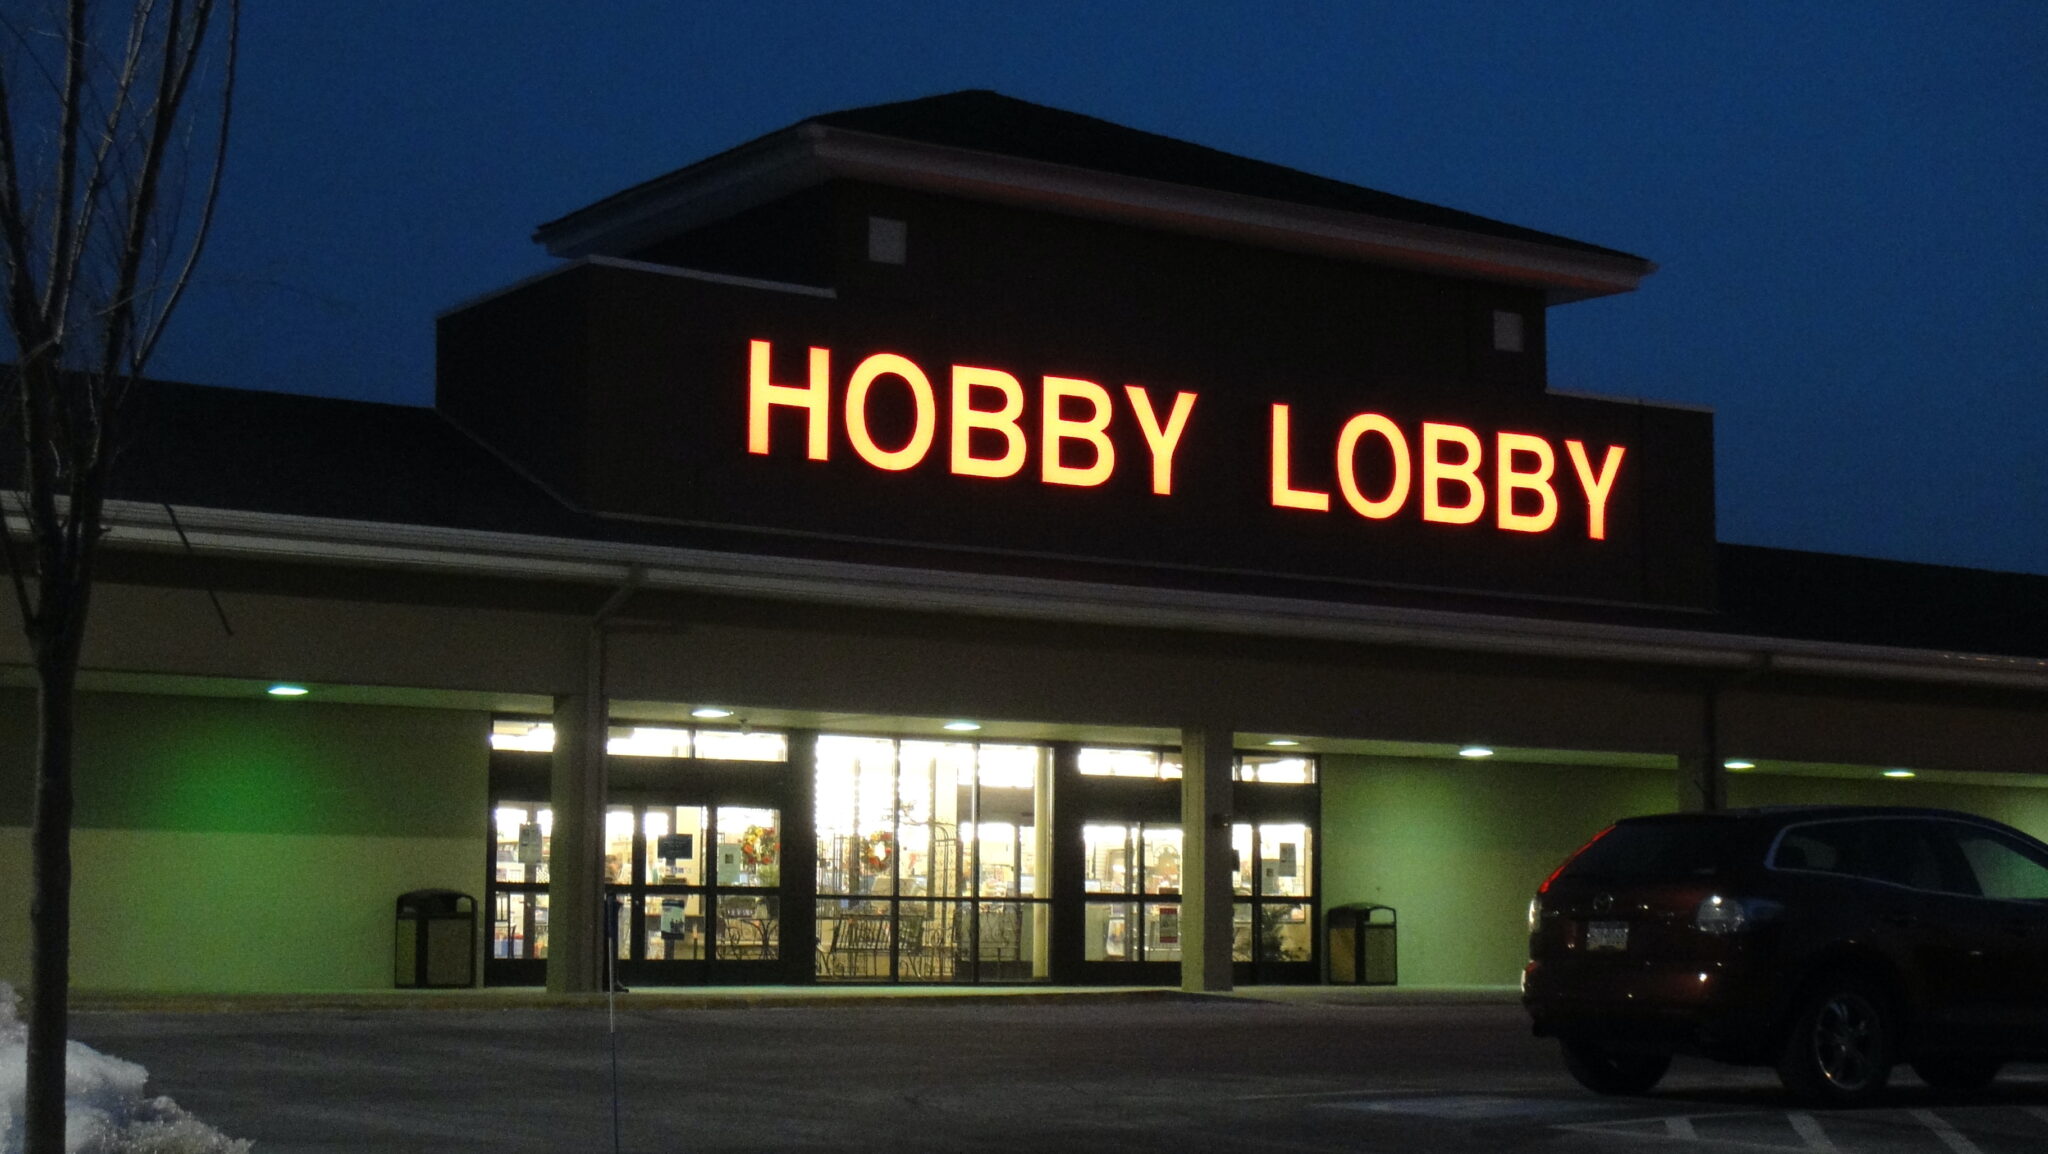 AI images create controversy for Hobby Lobby Faith on View